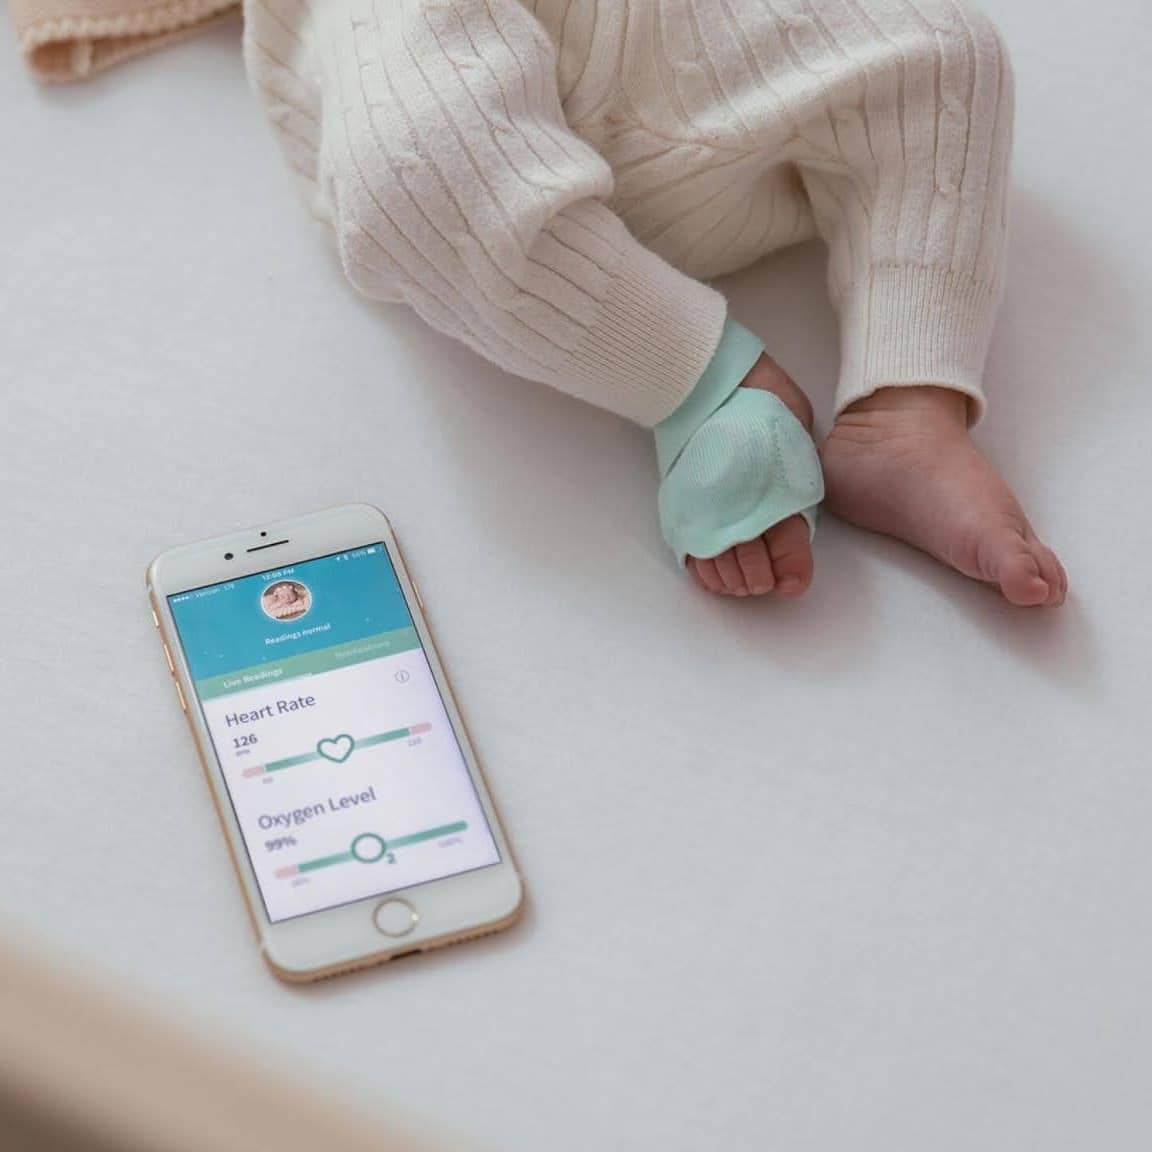 Robust Web App To Support IoT-Enabled Baby Tech